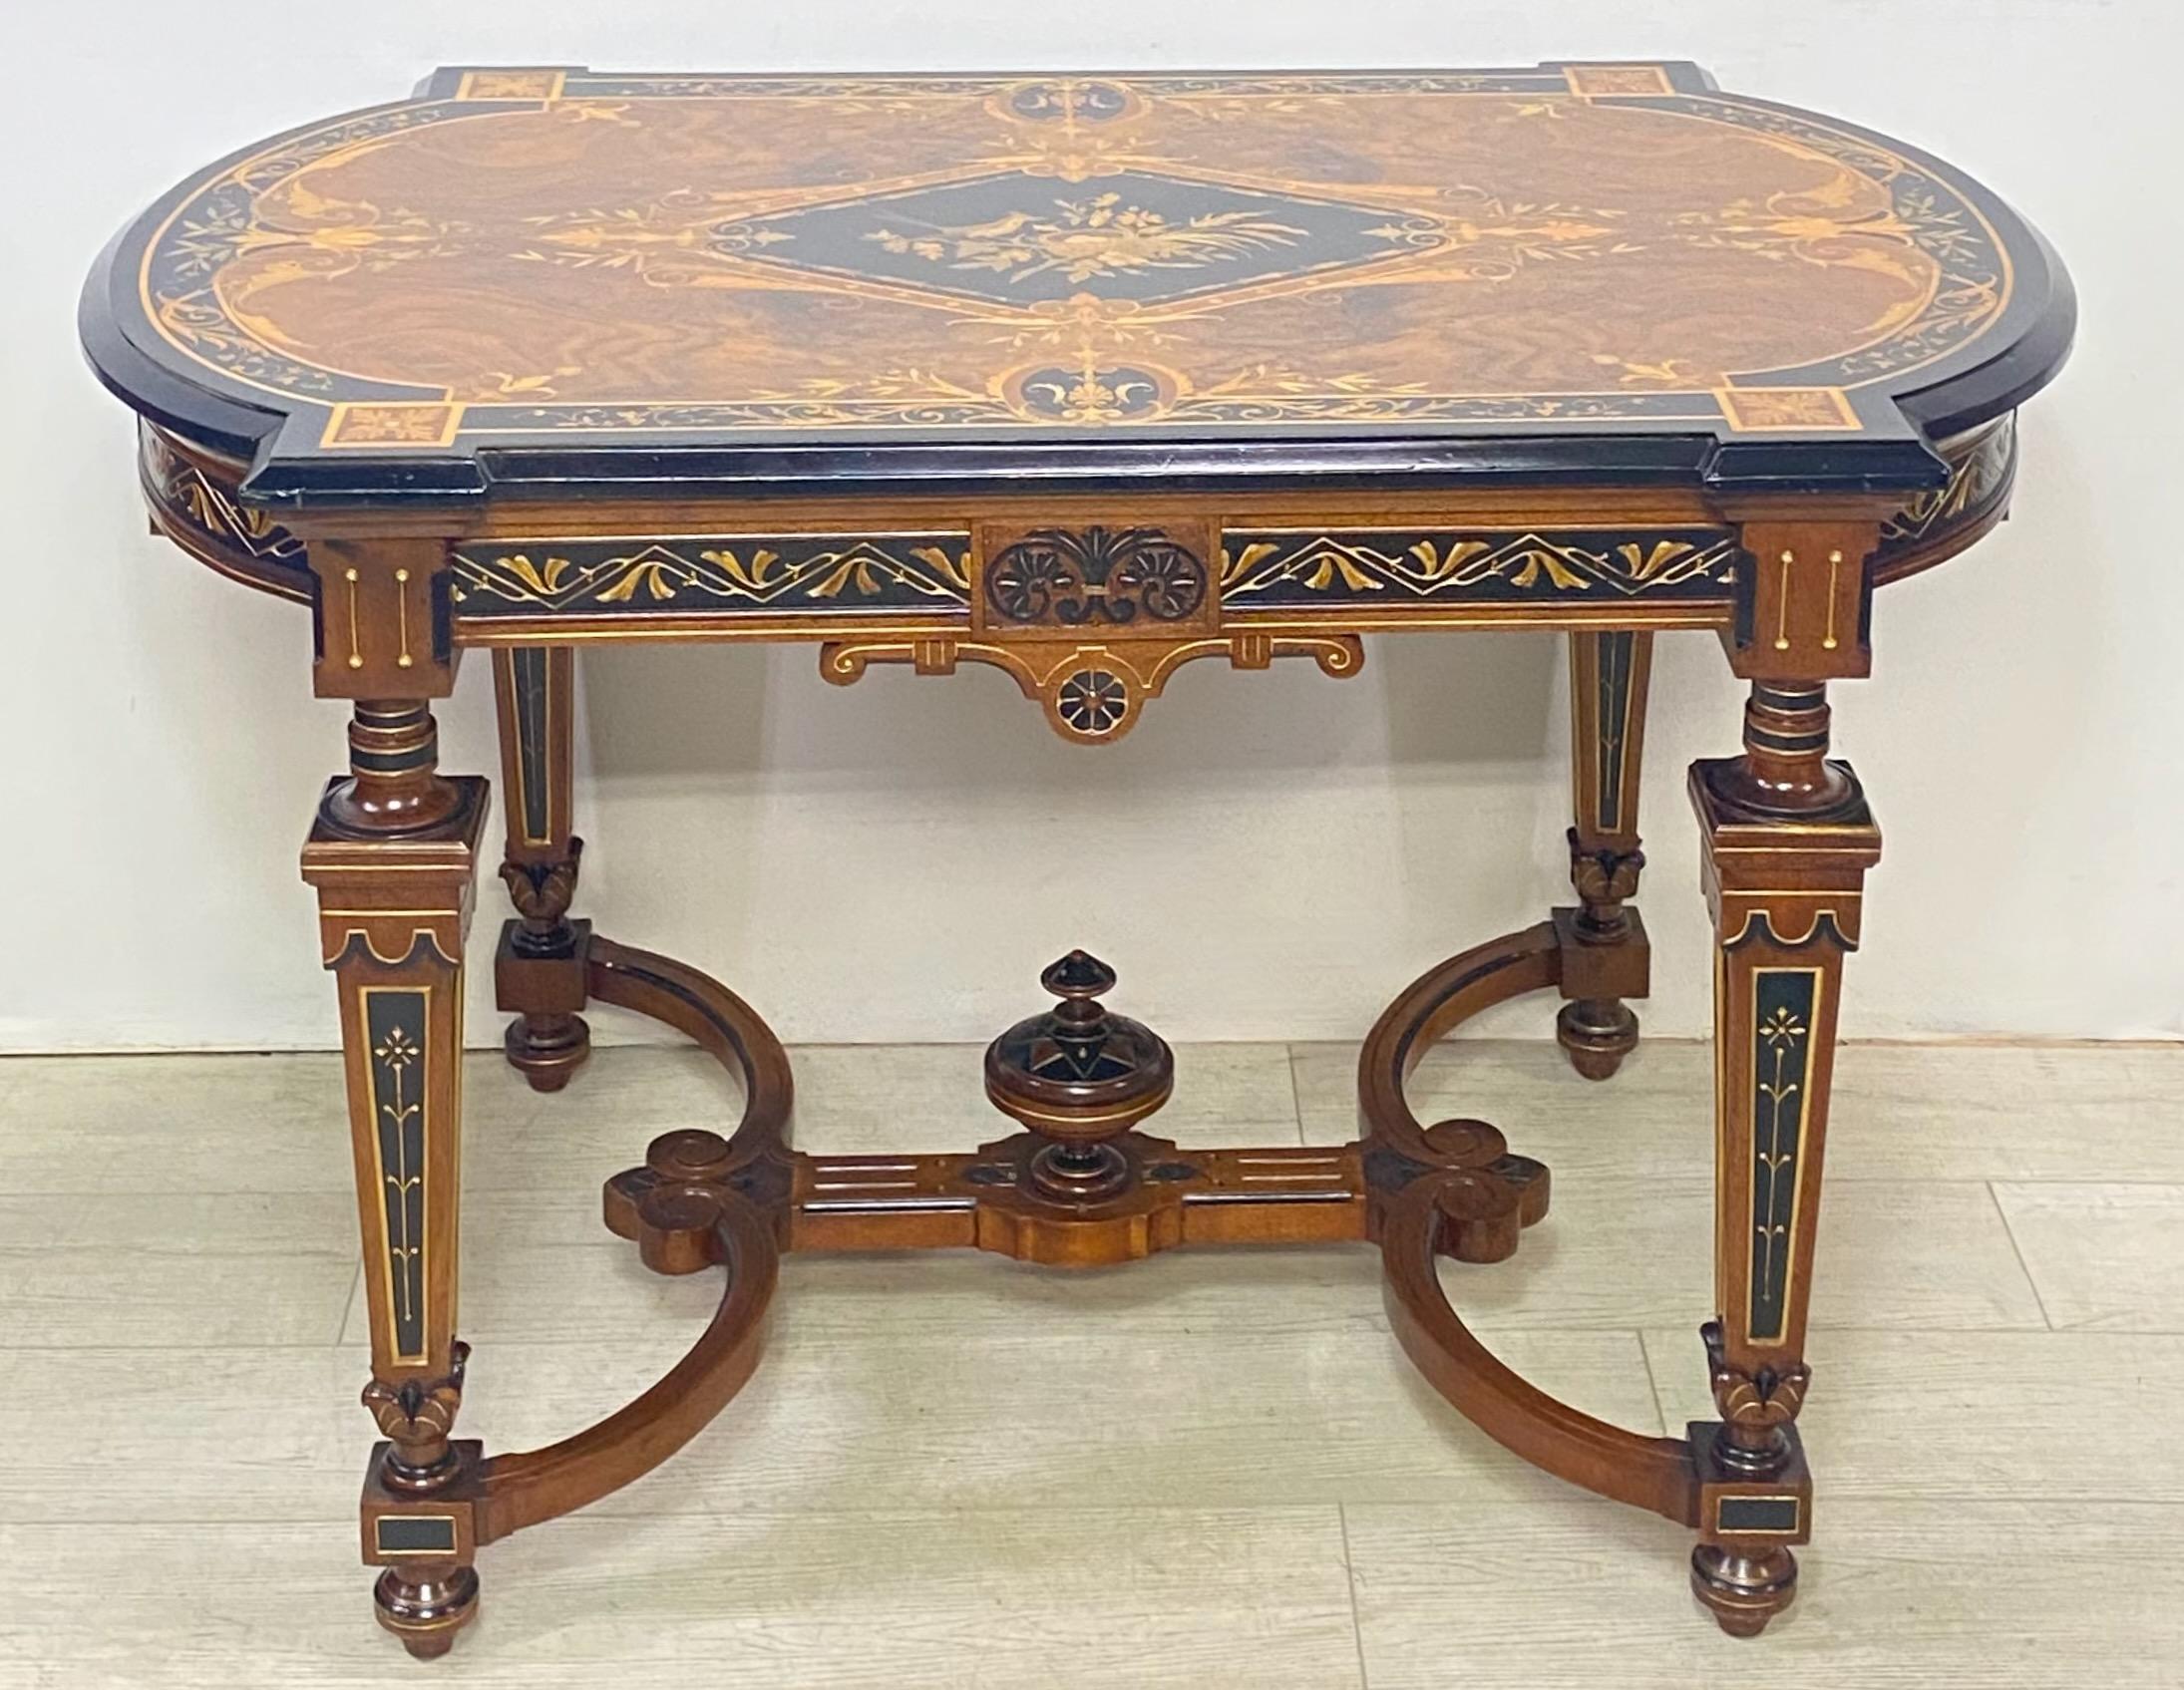 Victorian marquetry walnut center table in the style of Herter Brothers, New York, circa 1880. 
The elliptical partial gilt and ebonized molded edge top enclosing a framed elaborately detailed central scene of a bird with its egg filled nest.